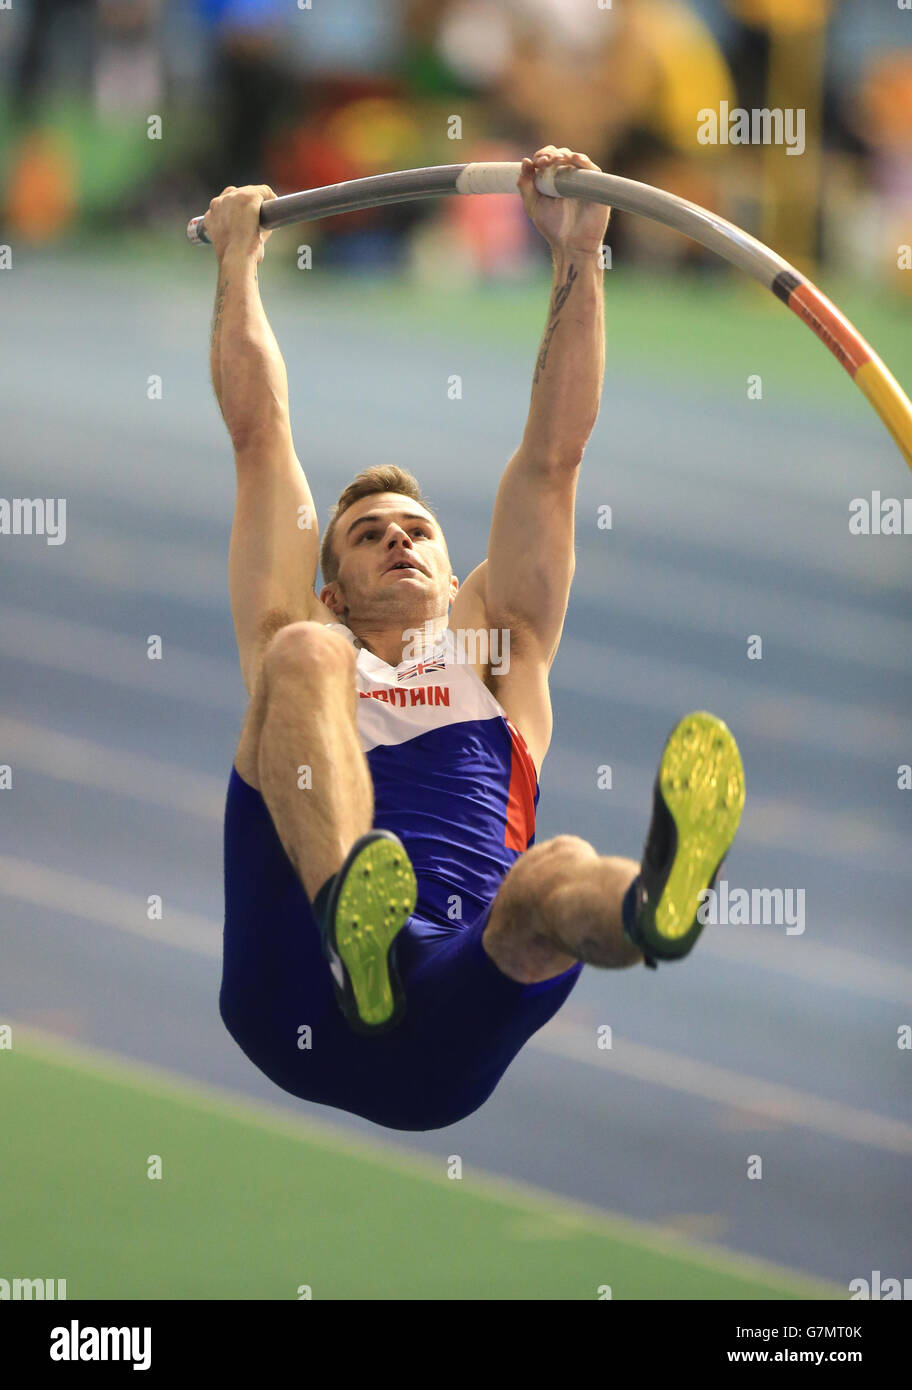 Luke Cutts on his way to winning the men's pole vault final during day two of the Sainsbury's British Indoor Championships at the English Institute of Sport, Sheffield. Stock Photo